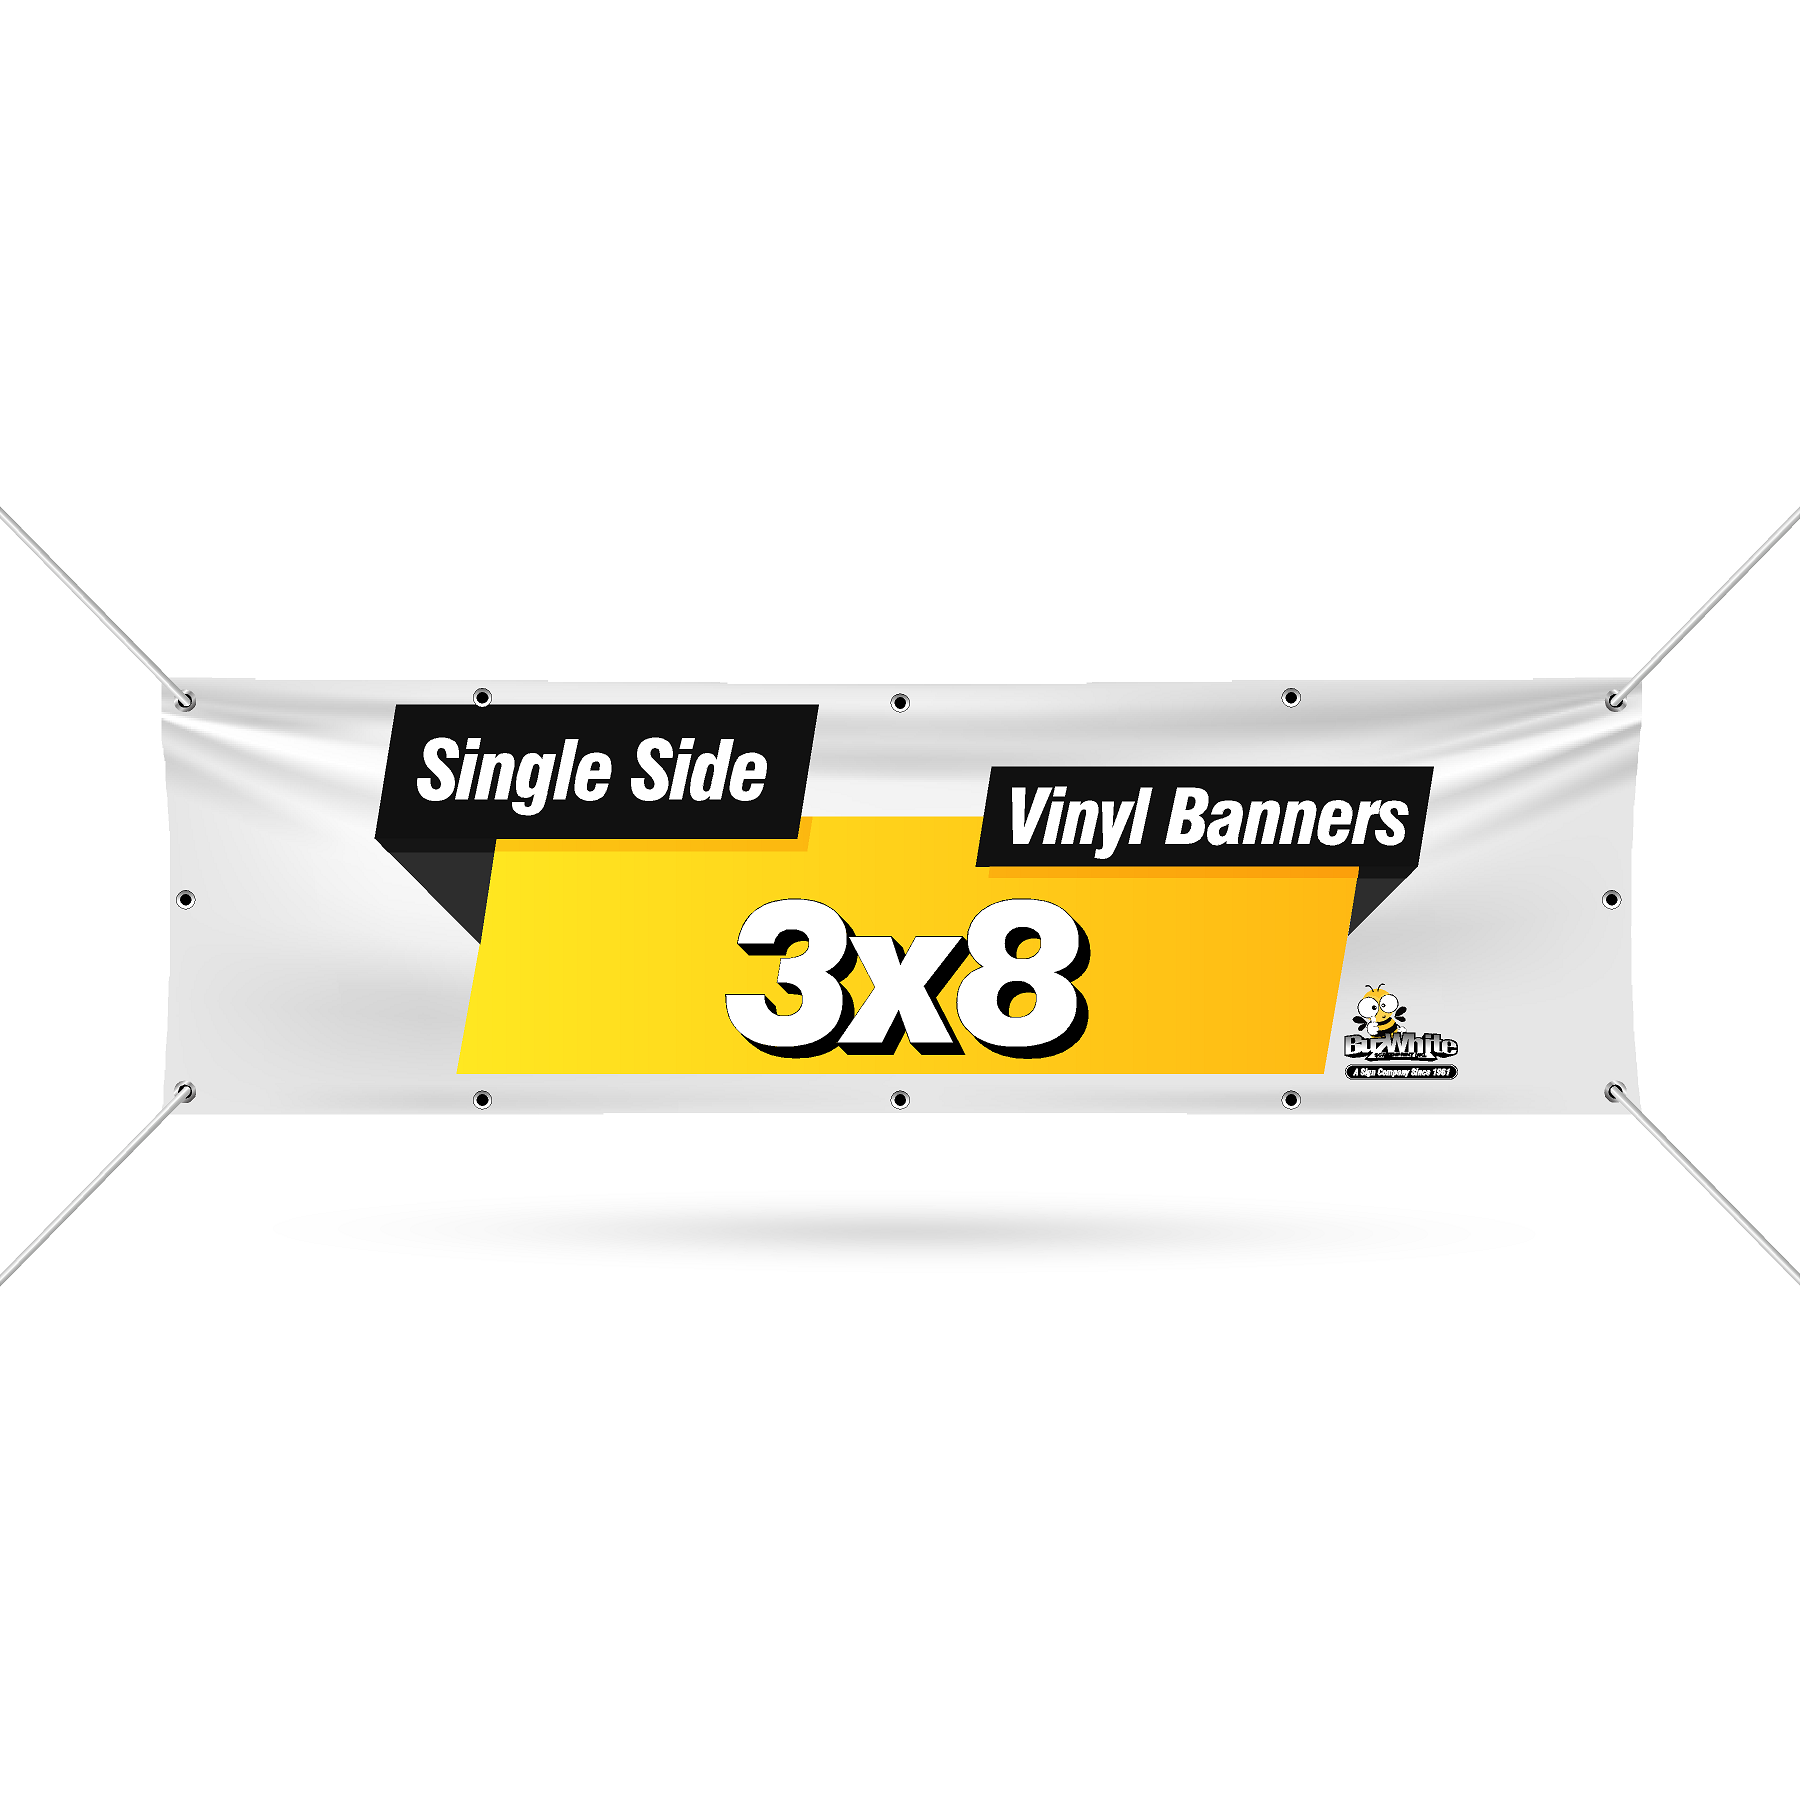 BannerBuzz Blog  Vinyl Banners, Signs, Decals, Lettering & More